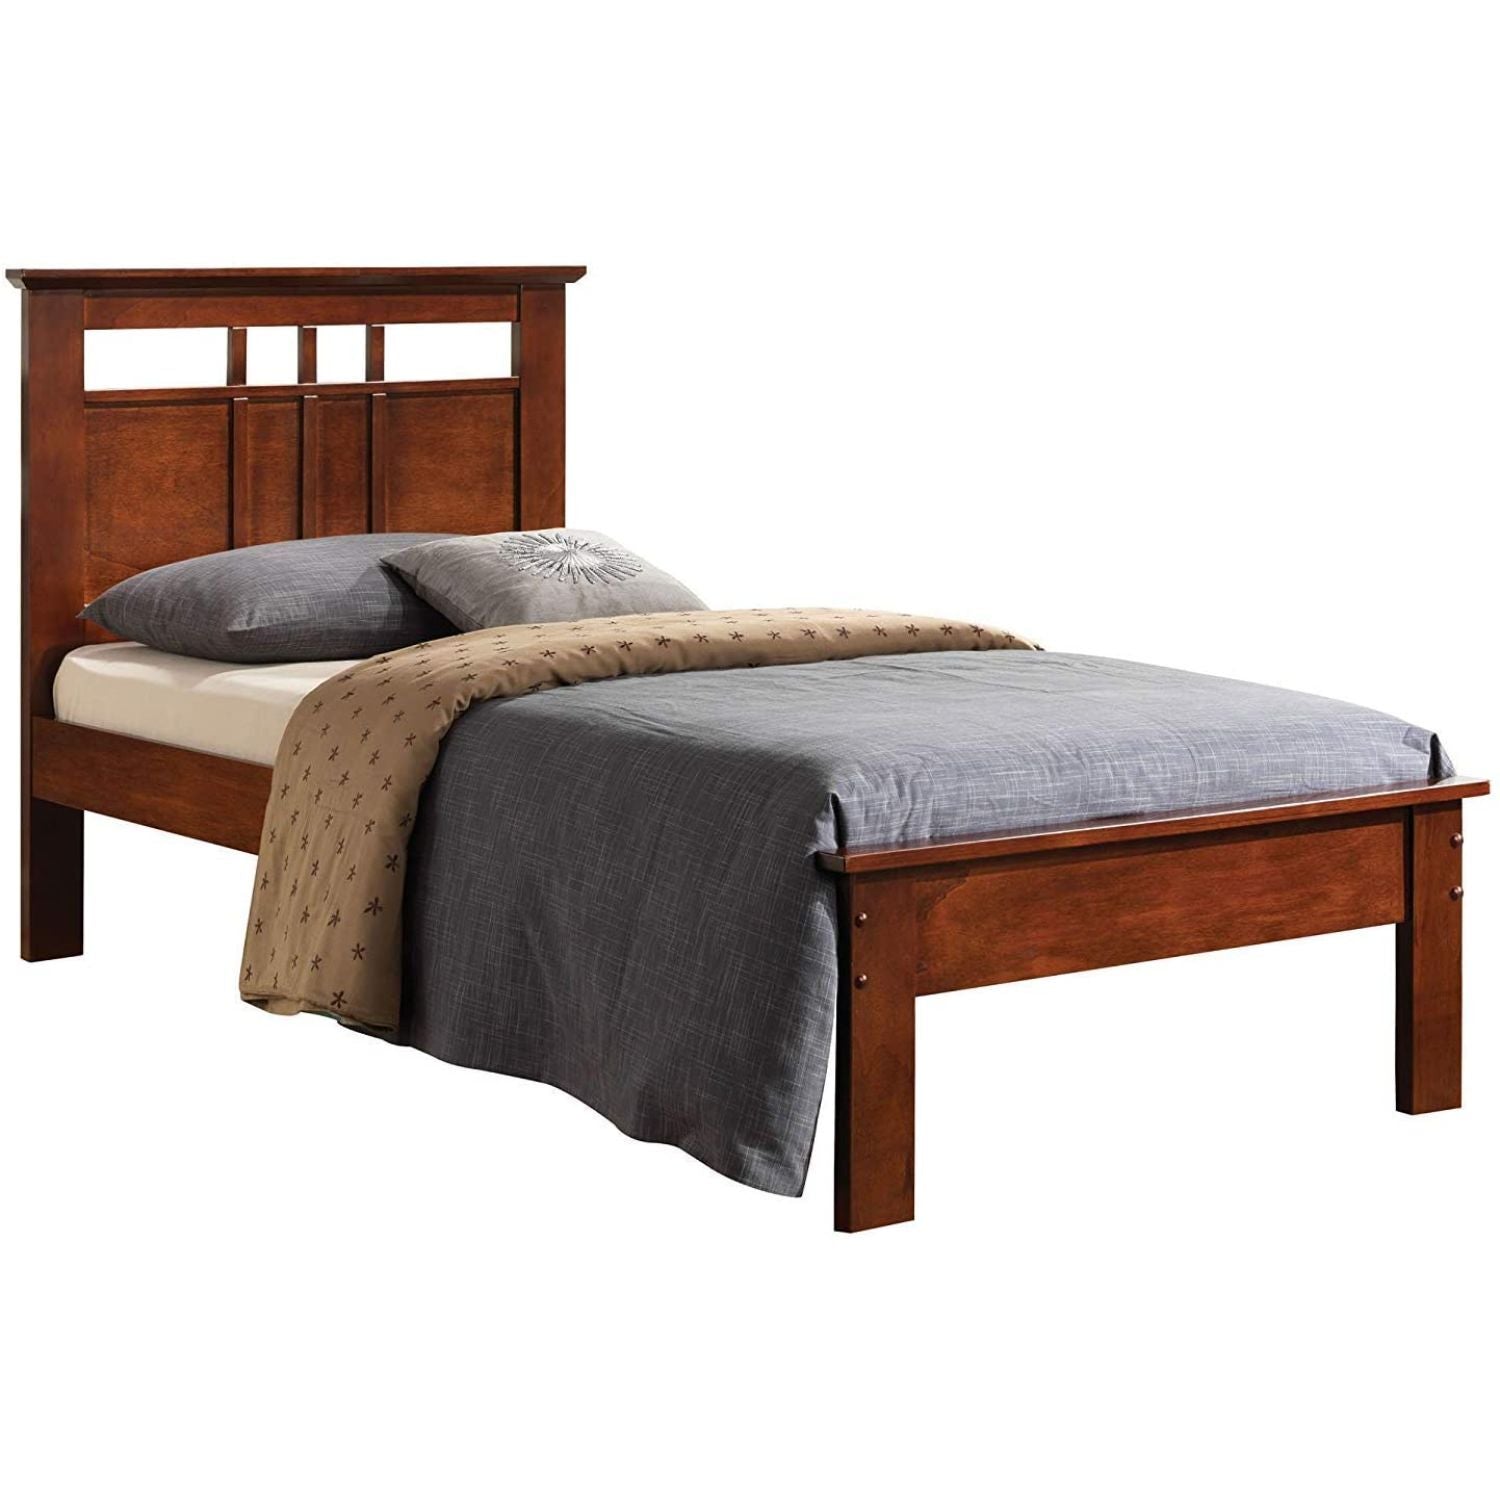 79" X 47" X 41" Twin Cappuccino Bed Default Title